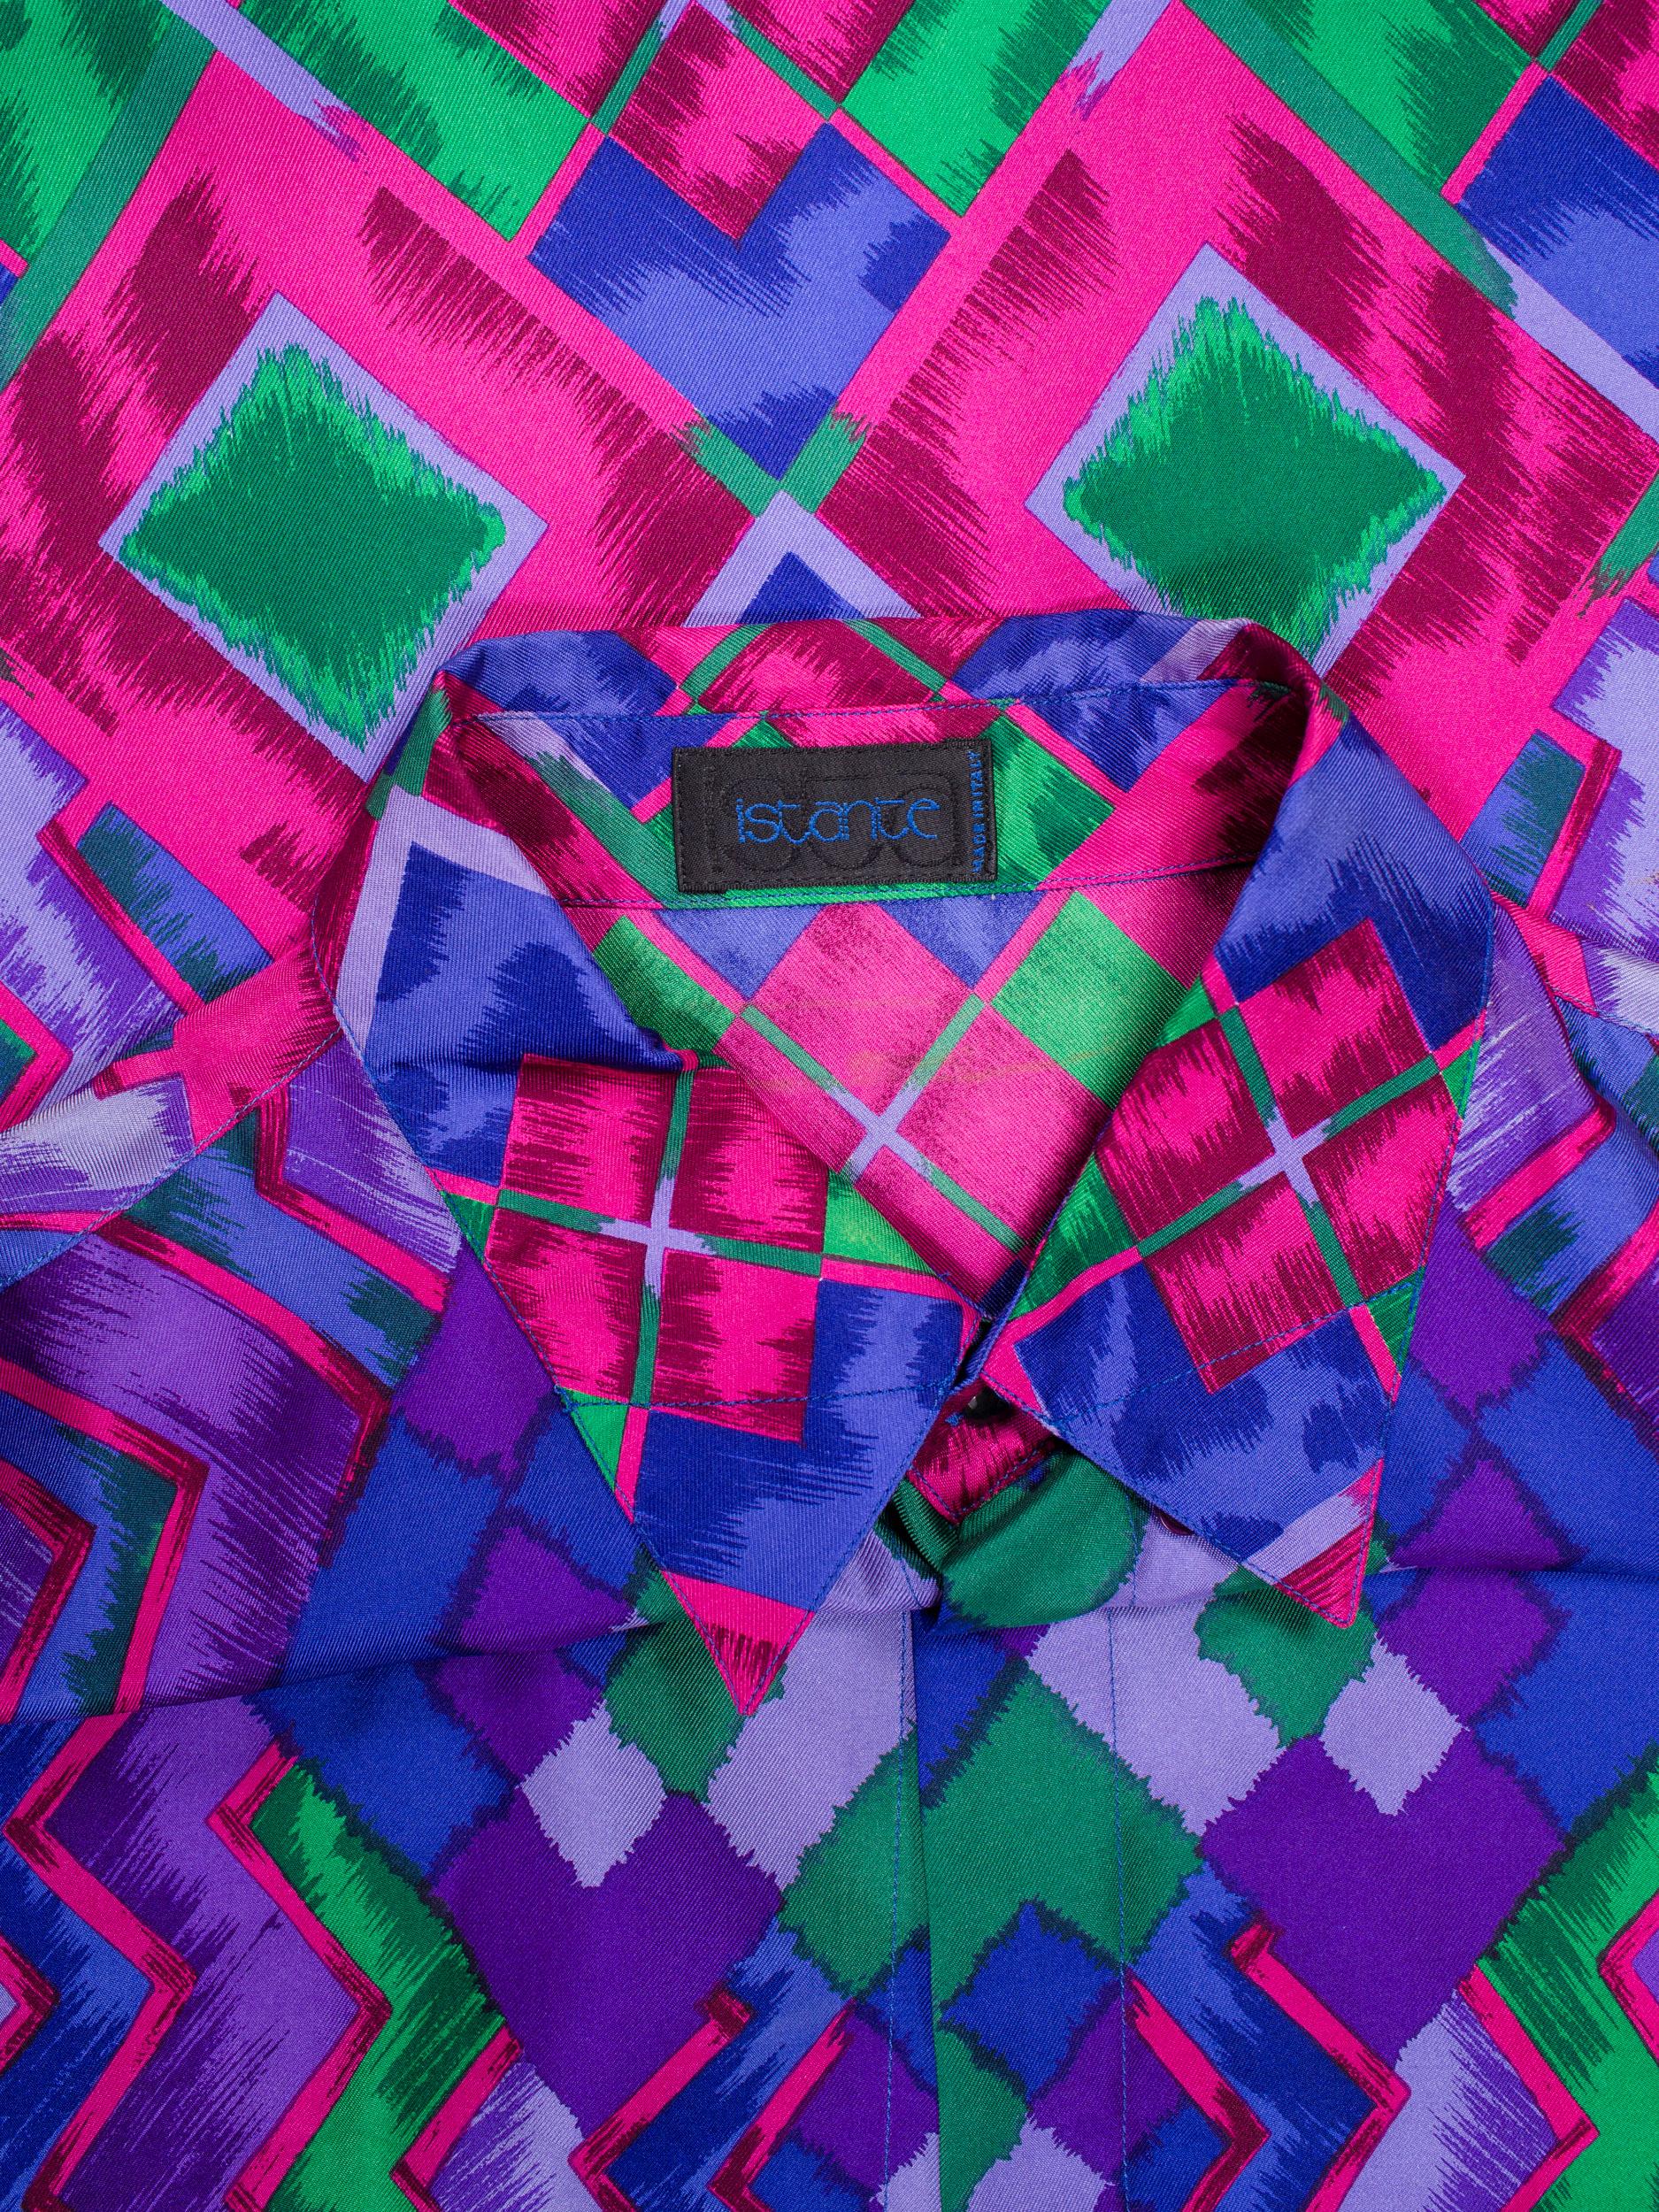 1990S GIANNI VERSACE Purple Geometric Silk Men's Istante Shirt Sz 46 In Excellent Condition For Sale In New York, NY